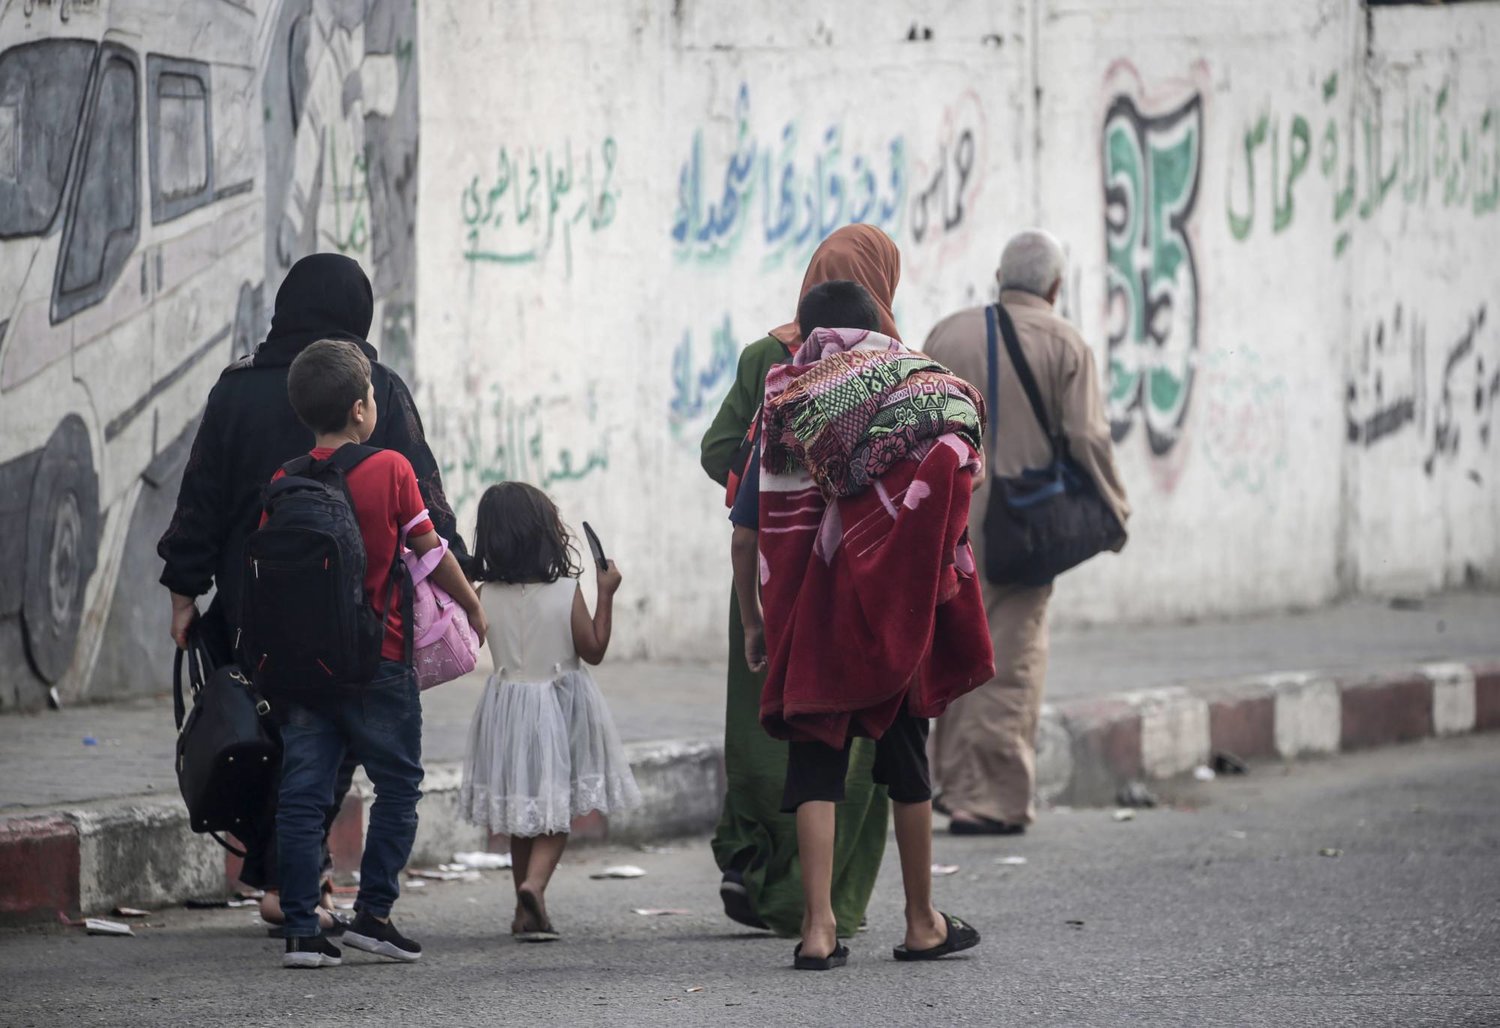 Over 20,000 Internally Displaced People take shelter at UNRWA schools in Gaza